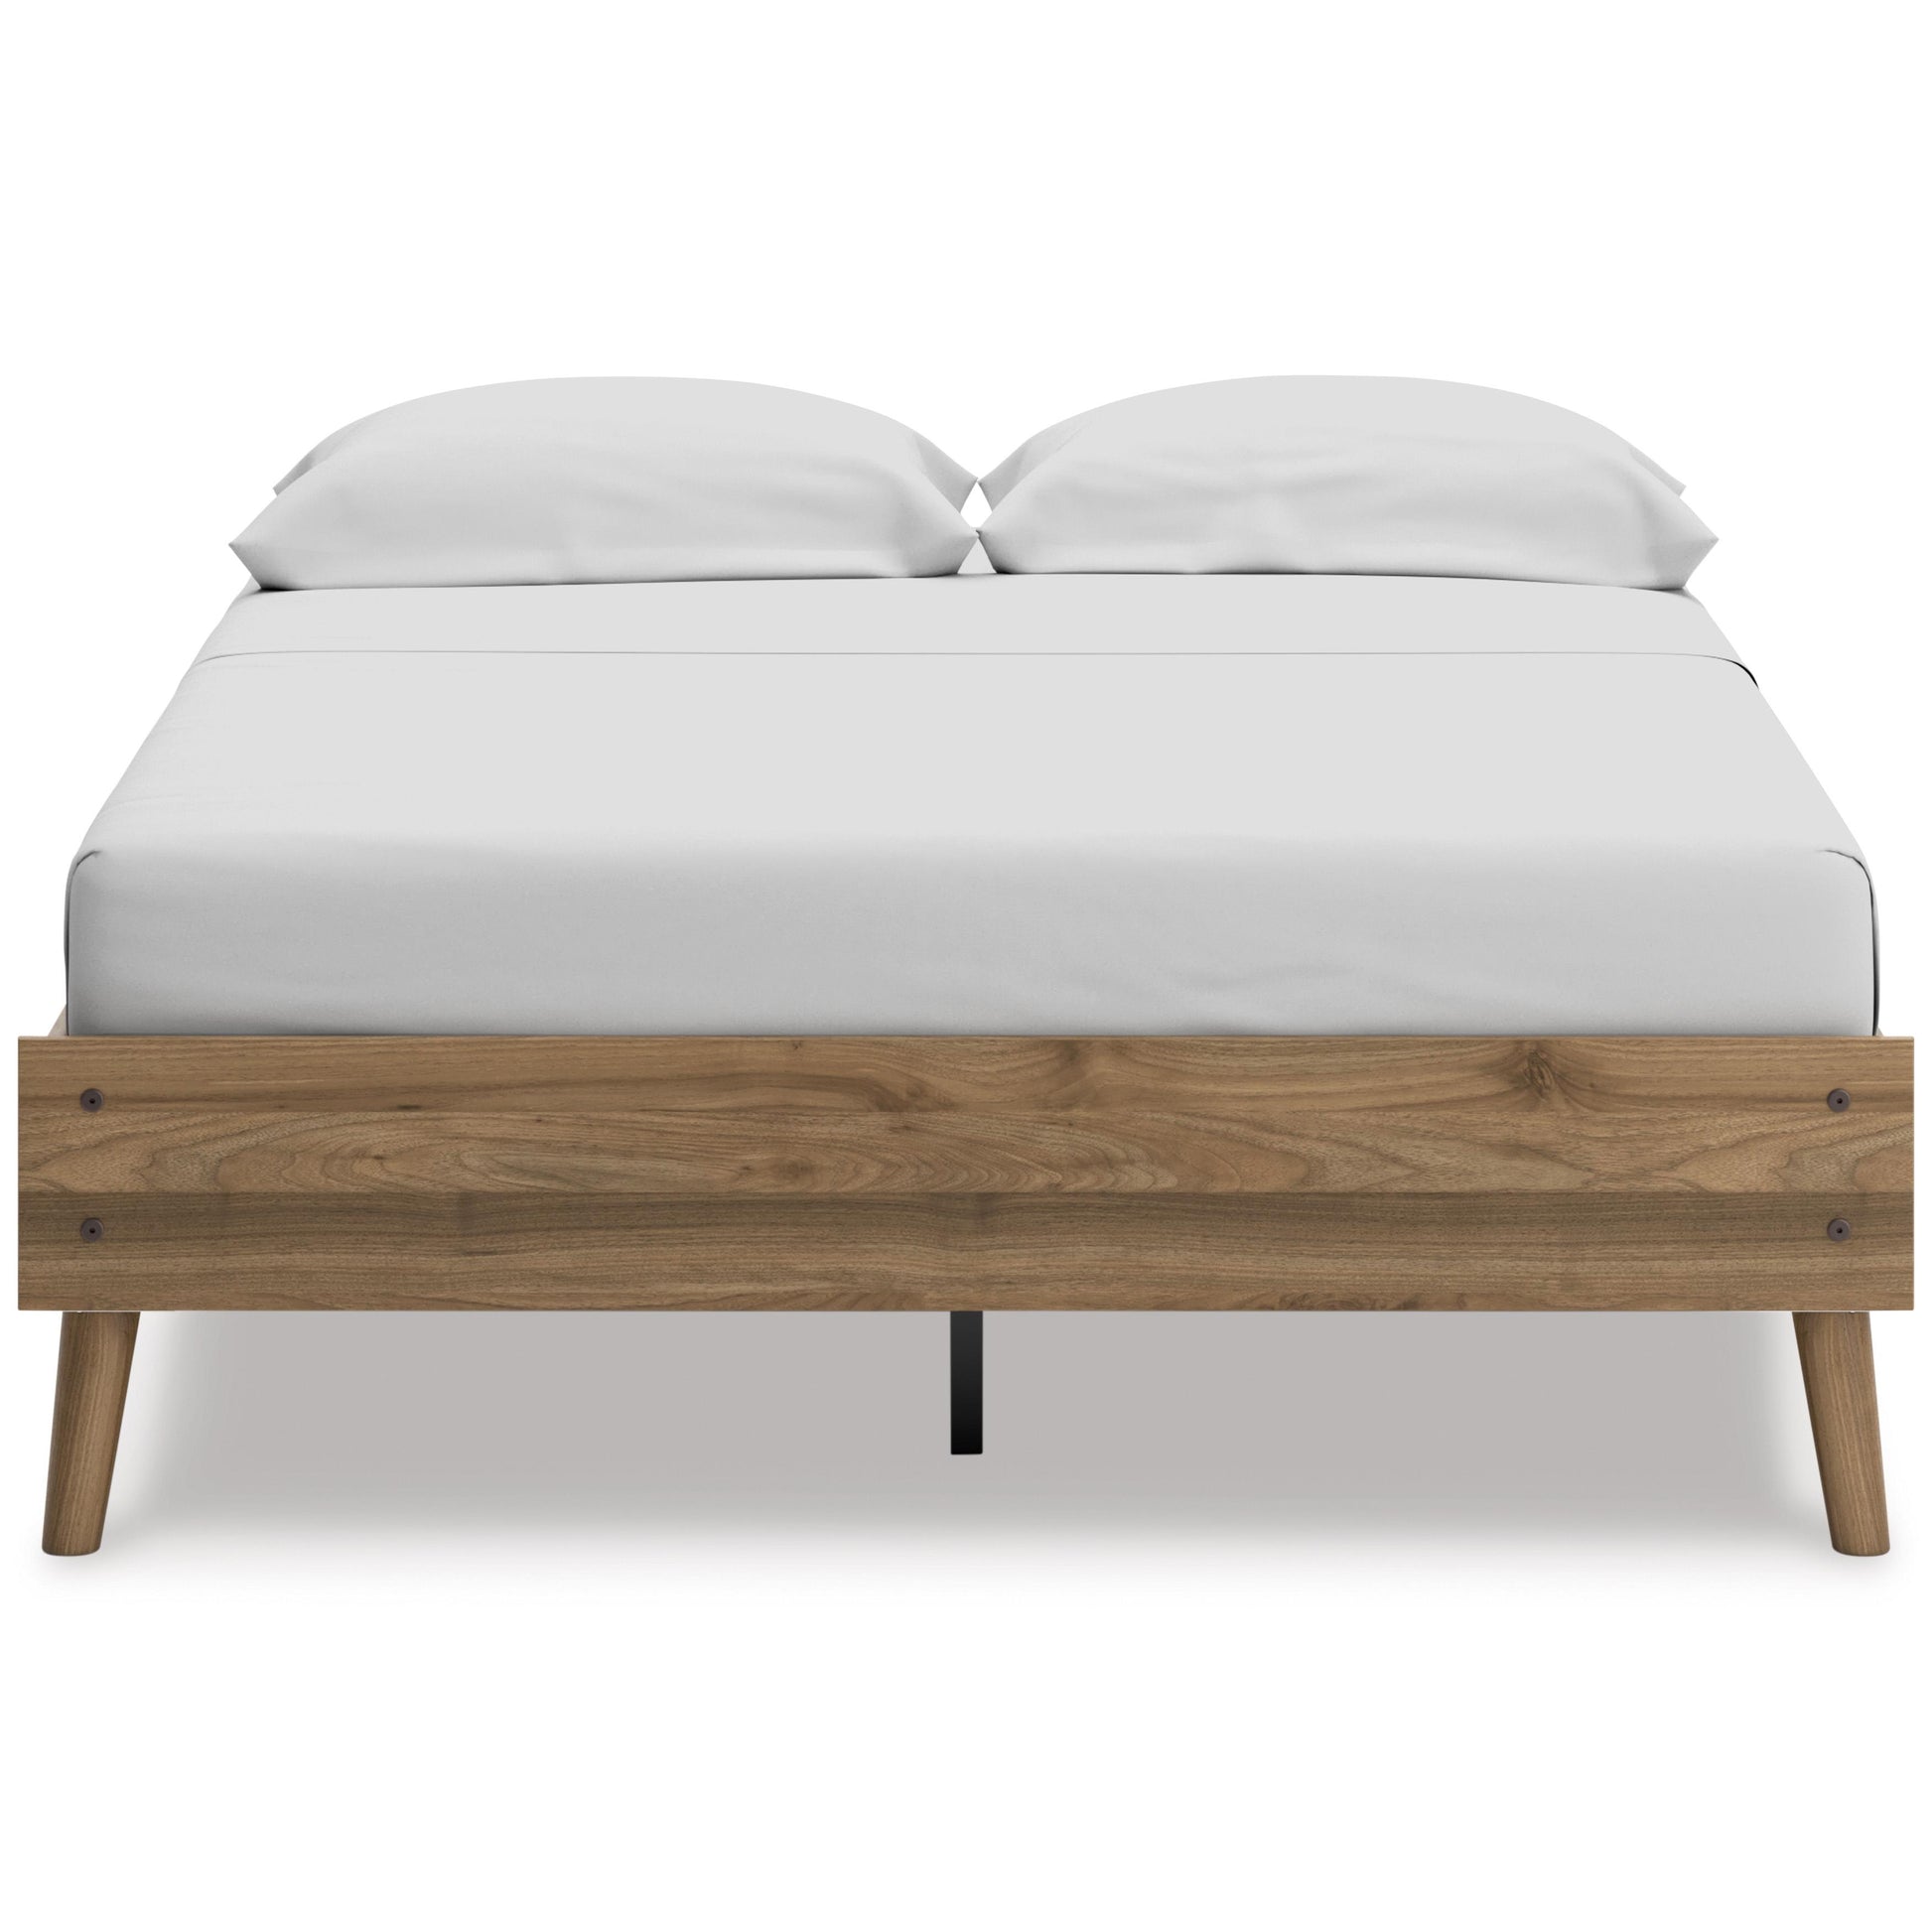 Signature Design by Ashley Kids Beds Bed EB1187-112 IMAGE 2